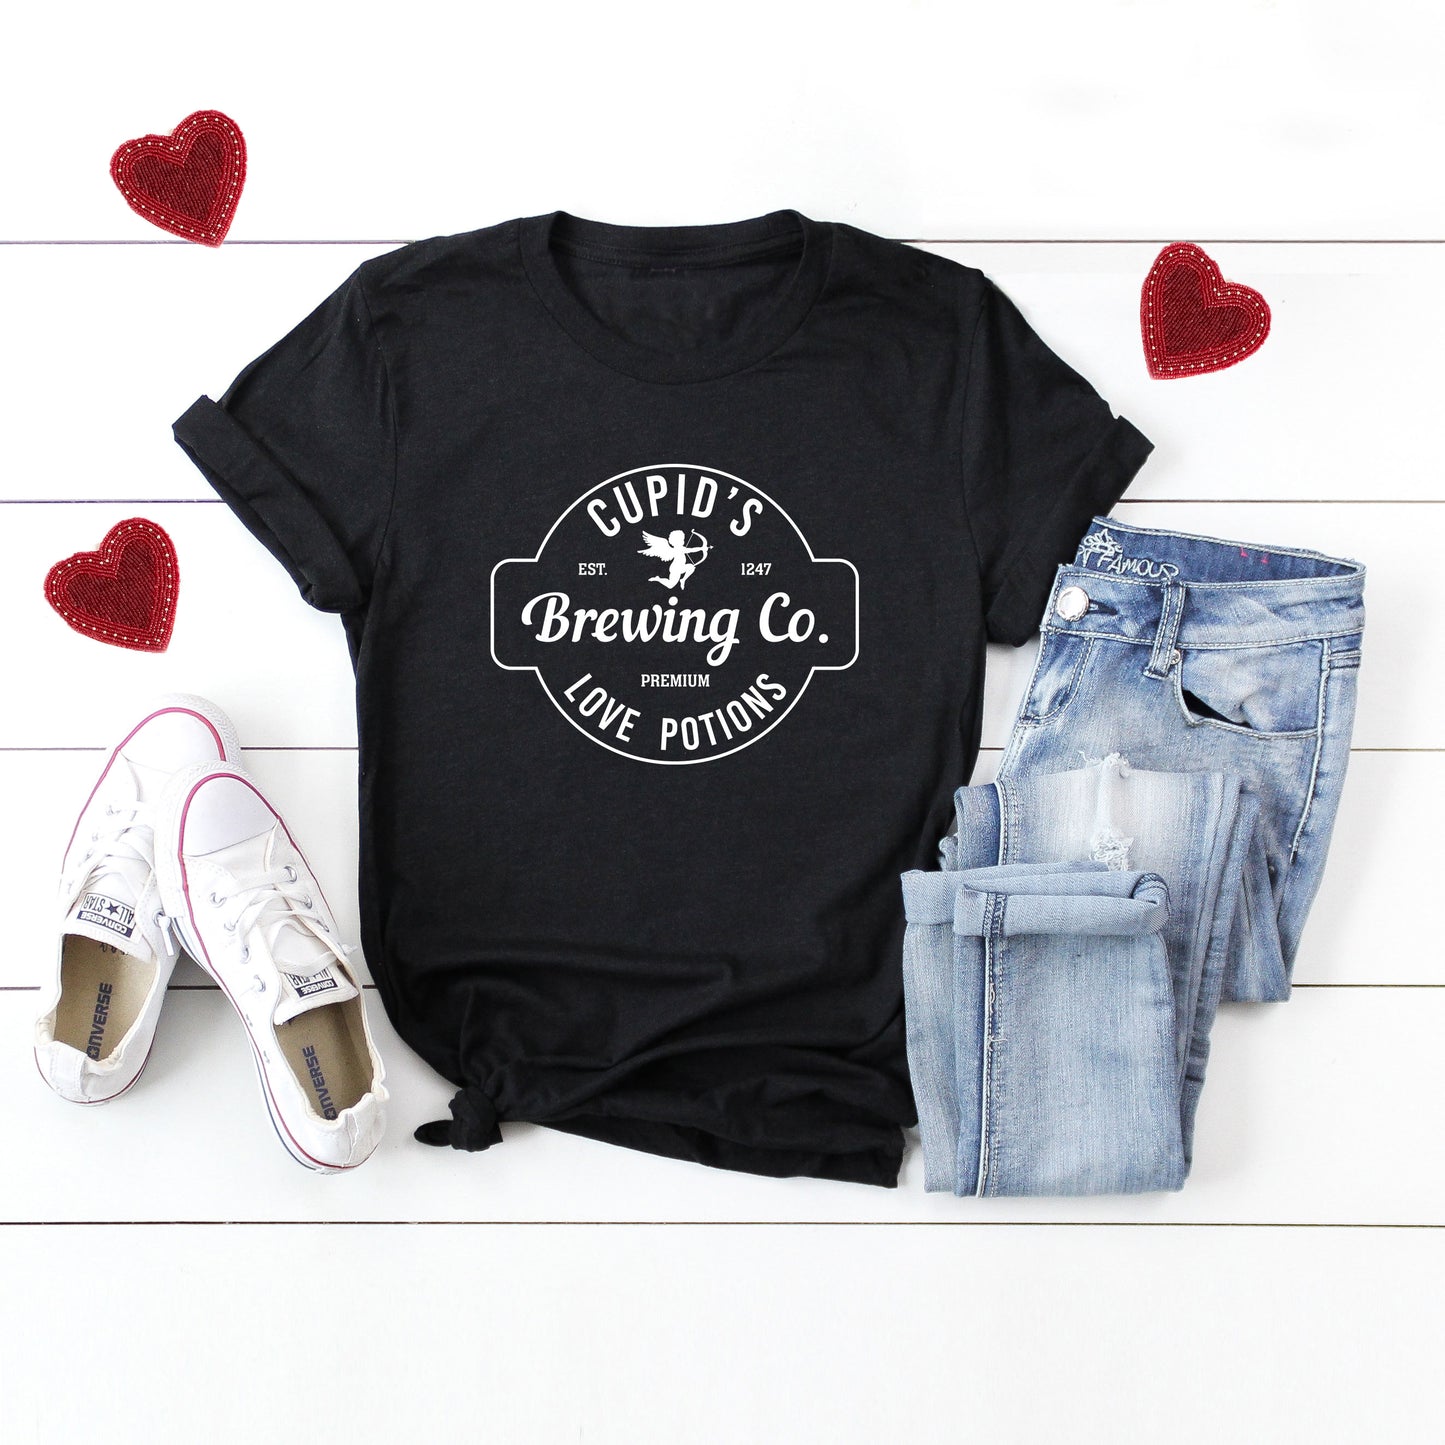 Cupid's Brewing Co. | Short Sleeve Graphic Tee